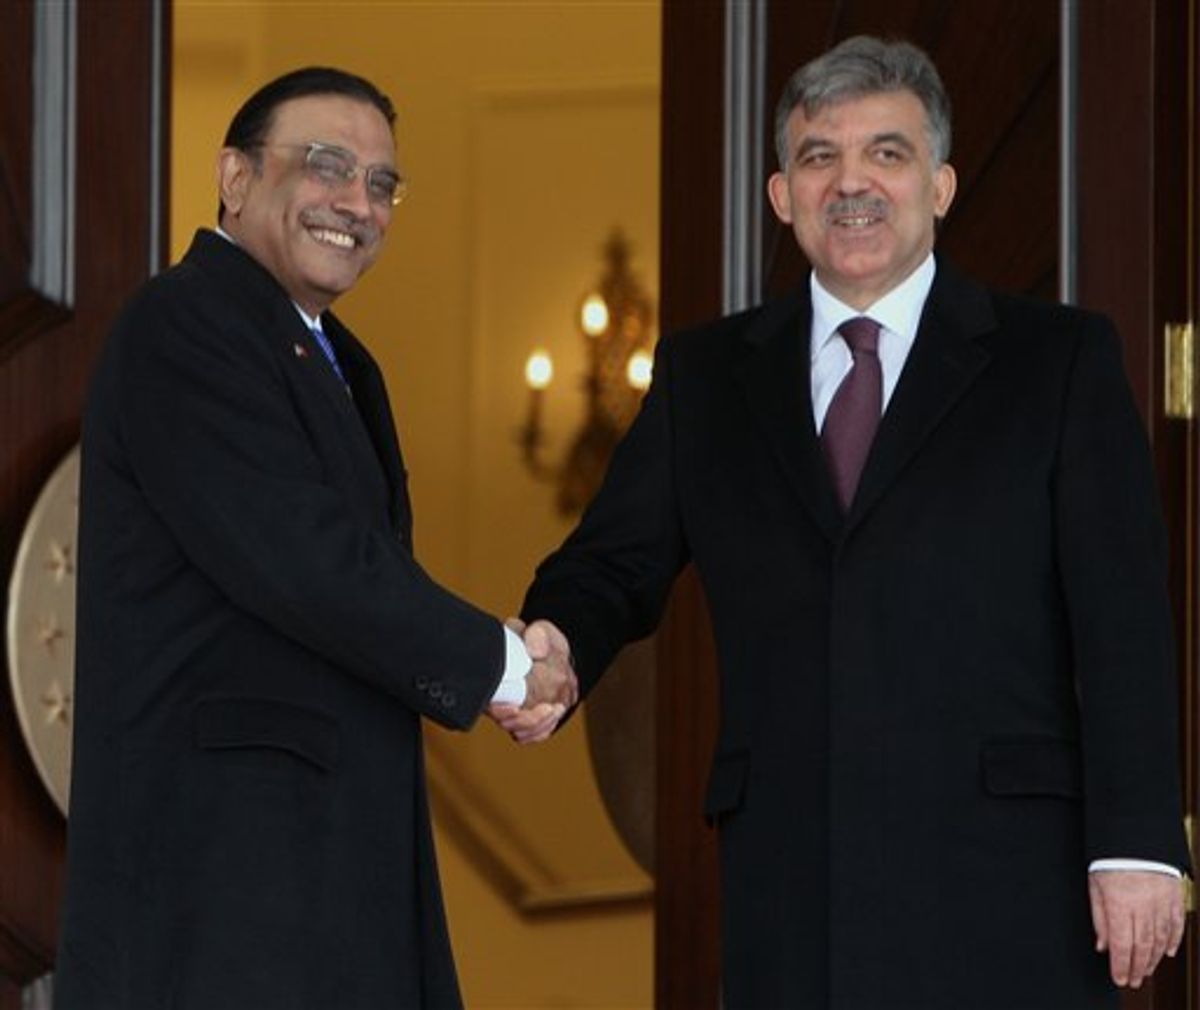 Pakistan's President Asif Ali Zardari, left, and his Turkish counterpart Abdullah Gul shake hands as they pose for cameras during a ceremony at the Cankaya presidential palace in Ankara, Turkey, Wednesday, April 13, 2011. Zardari is in Turkey for a four-day state visit.(AP Photo/Burhan Ozbilici) (AP)